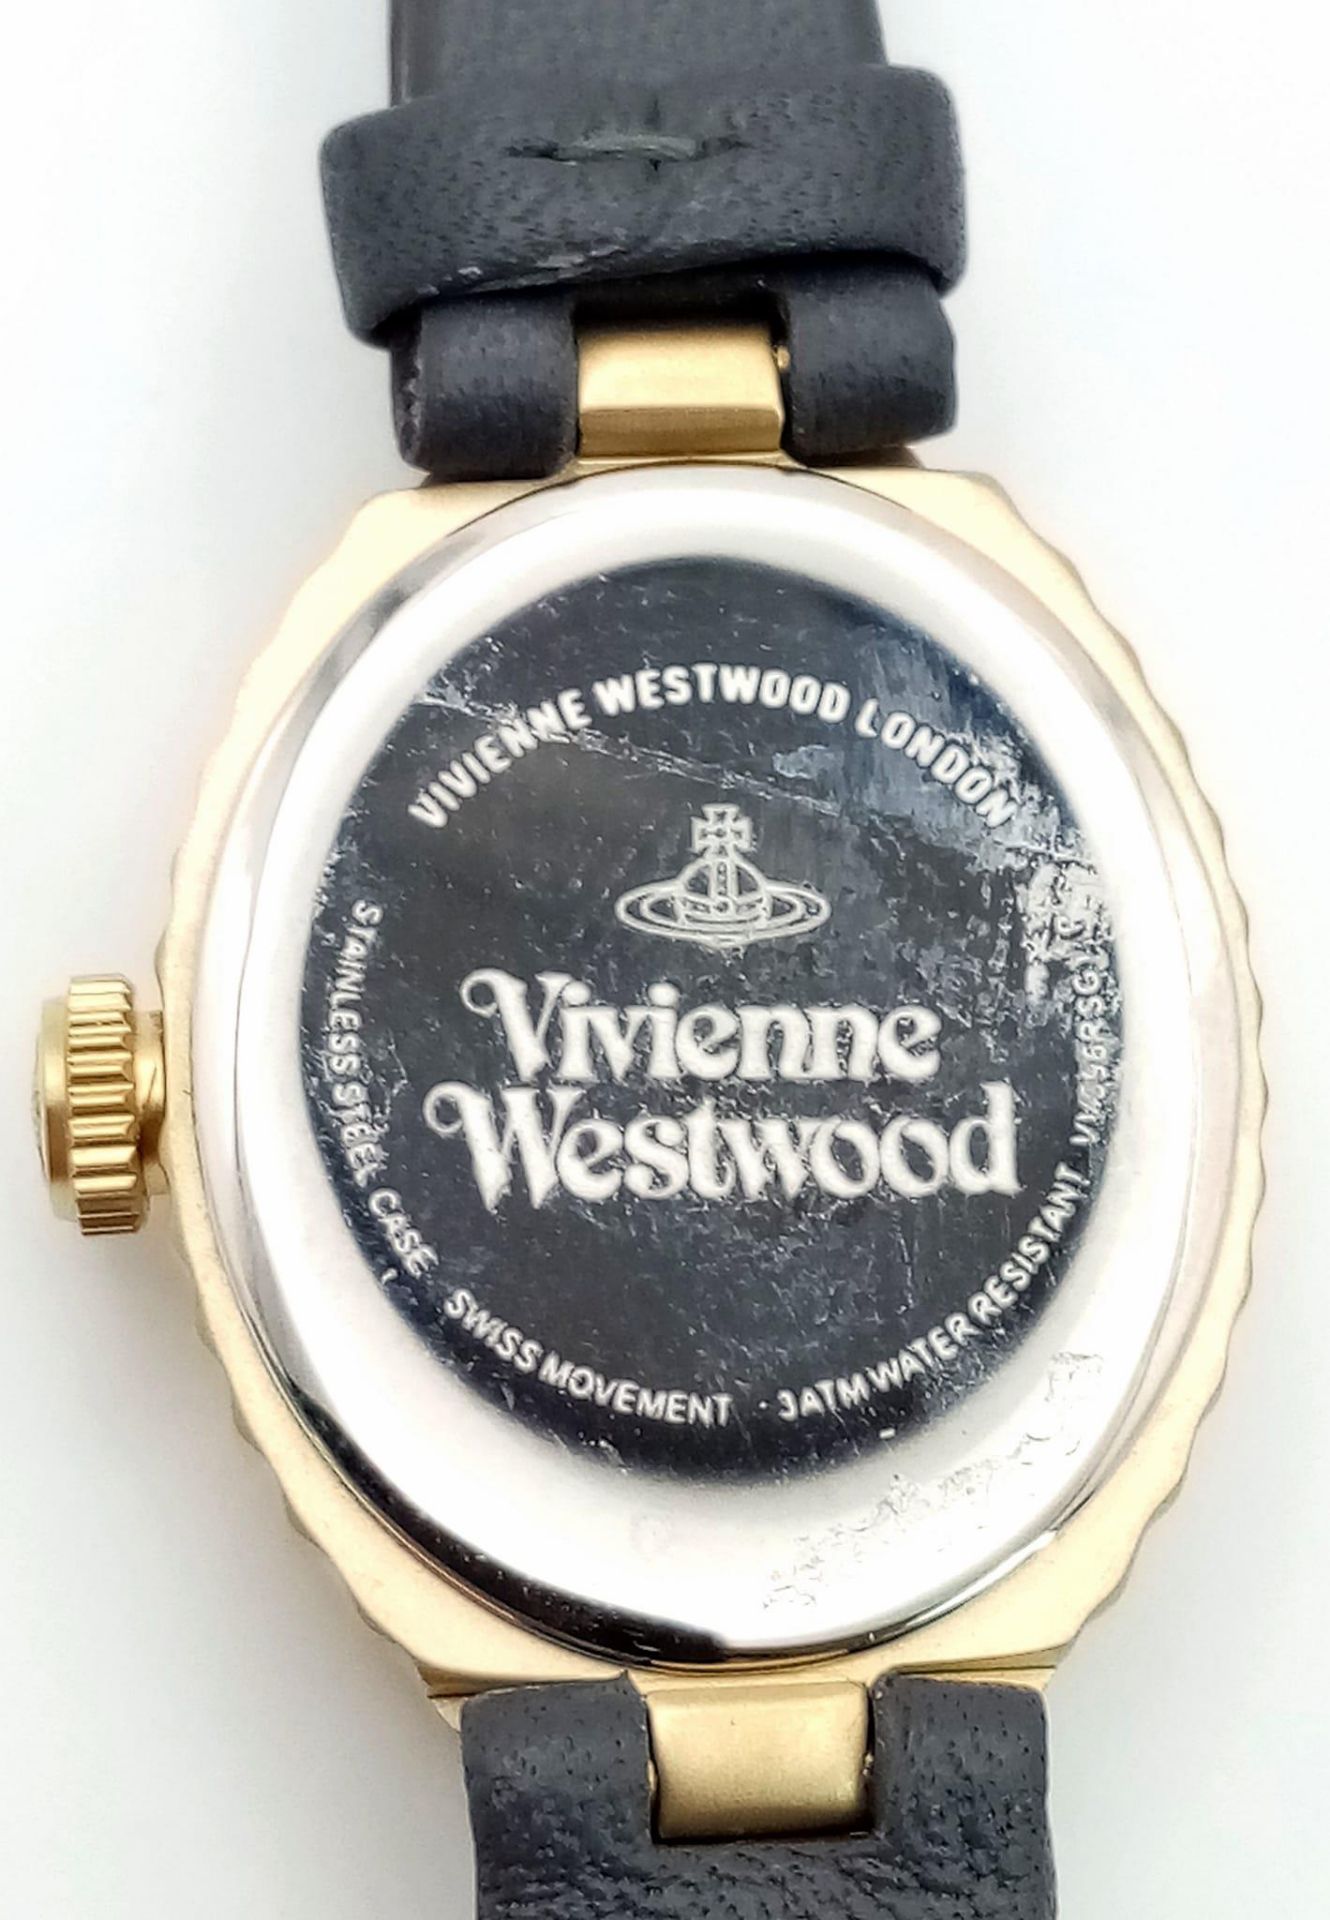 A Vivienne Westwood Oval Shell Watch. Grey leather strap. Gilded ceramic case - 21mm. Pink dial. - Image 5 of 5